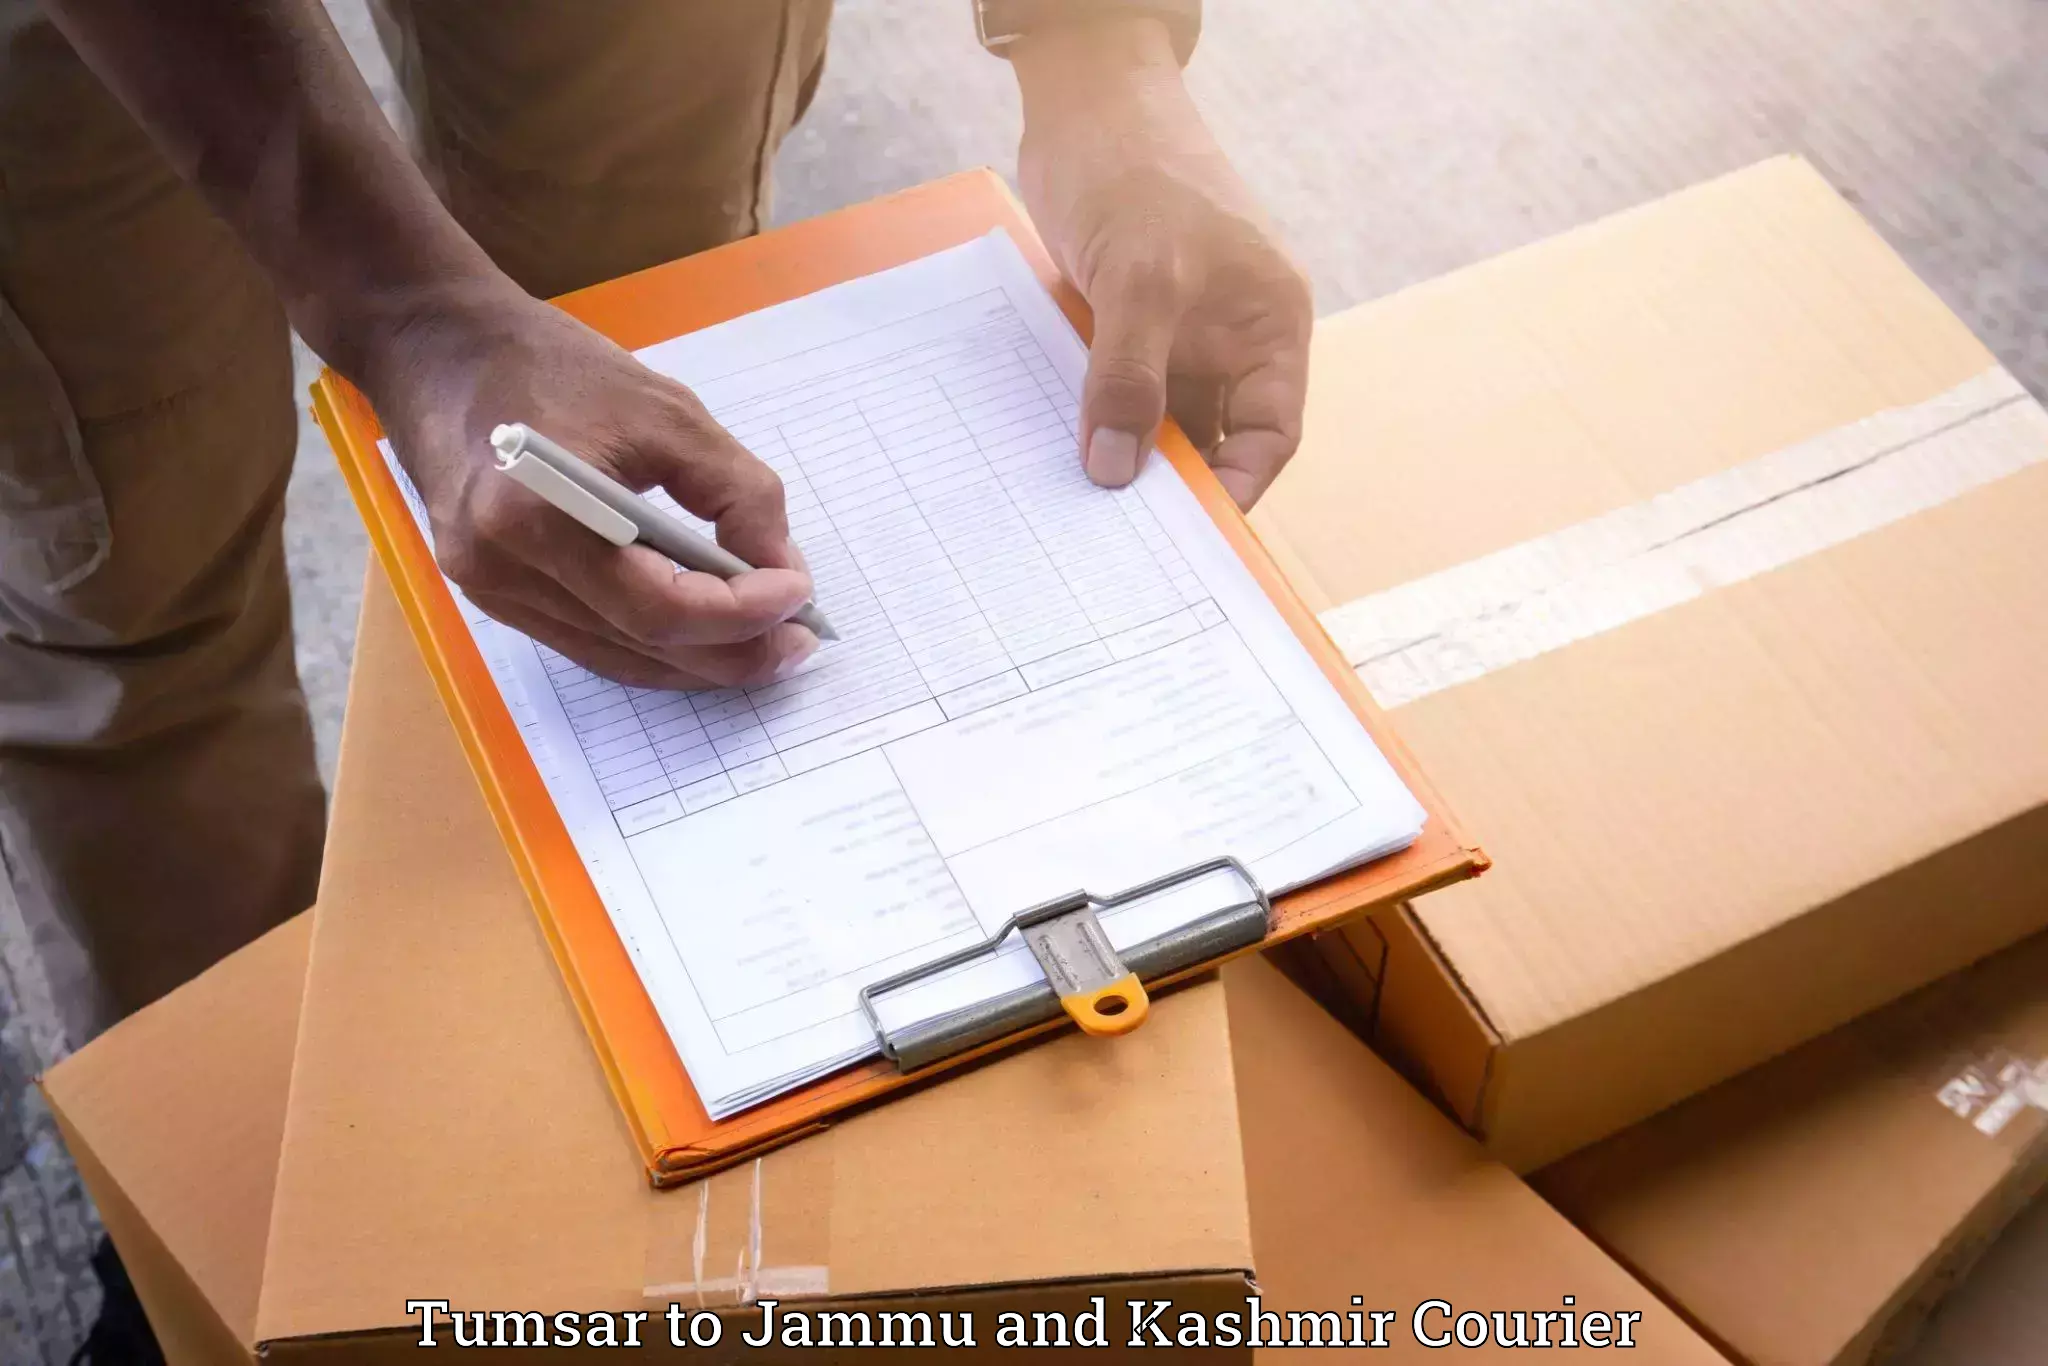 Furniture transport specialists in Tumsar to Jammu and Kashmir